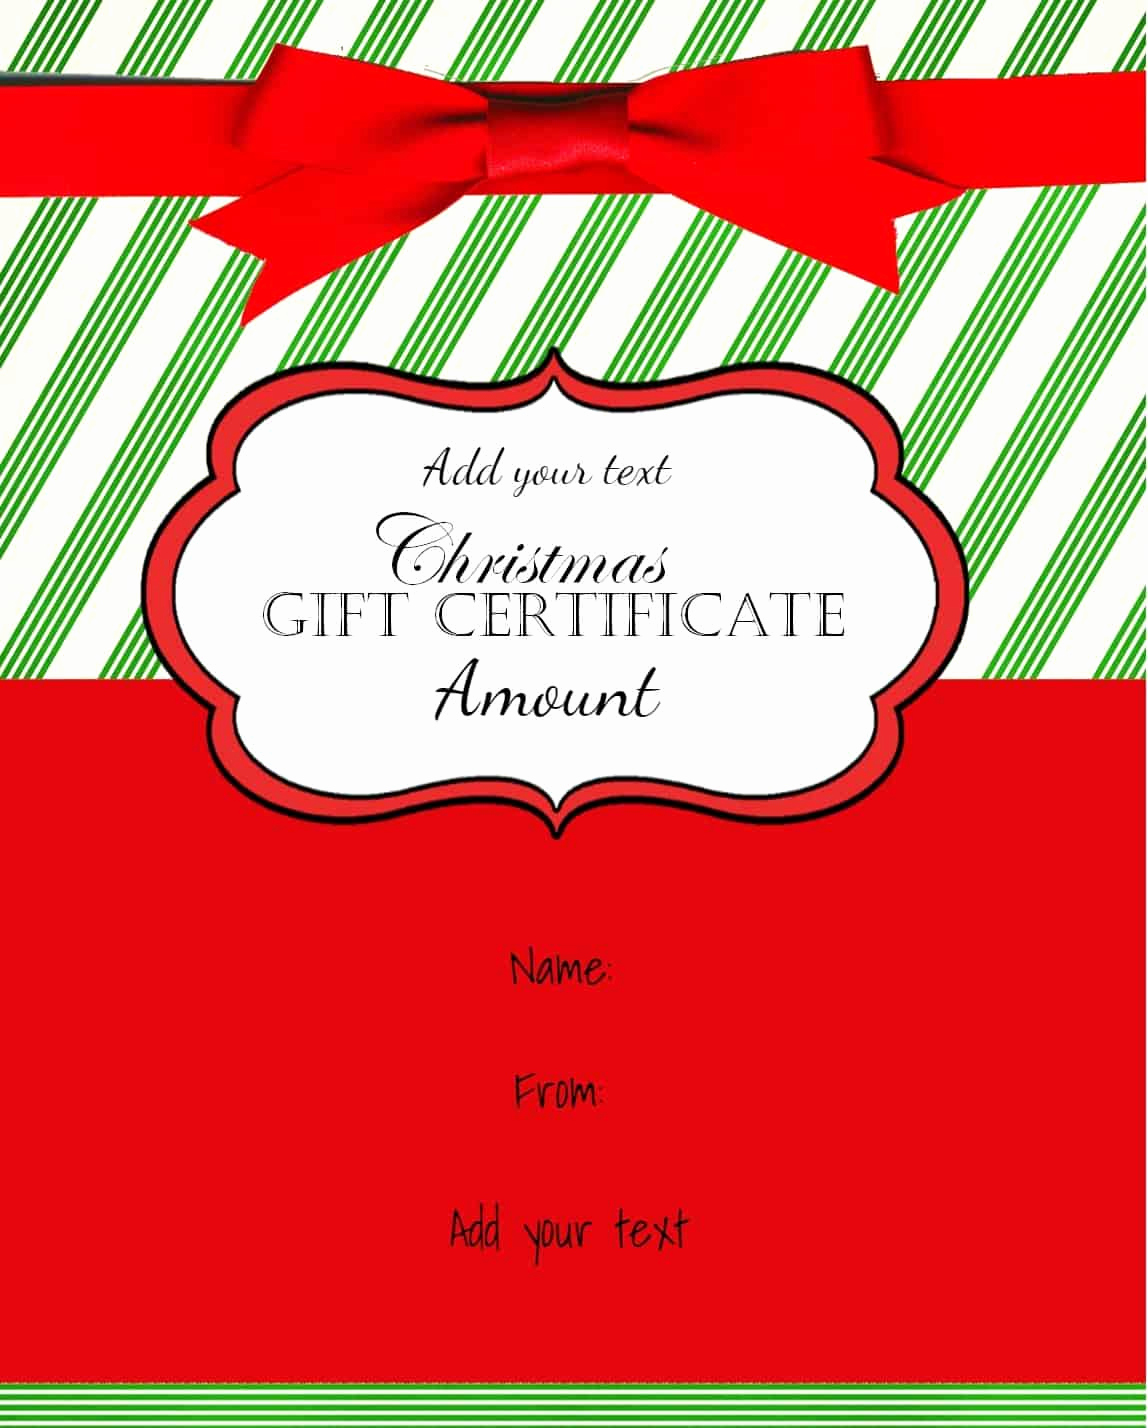 Customizable Gift Certificate Template Lovely Free Christmas Gift Certificate Template